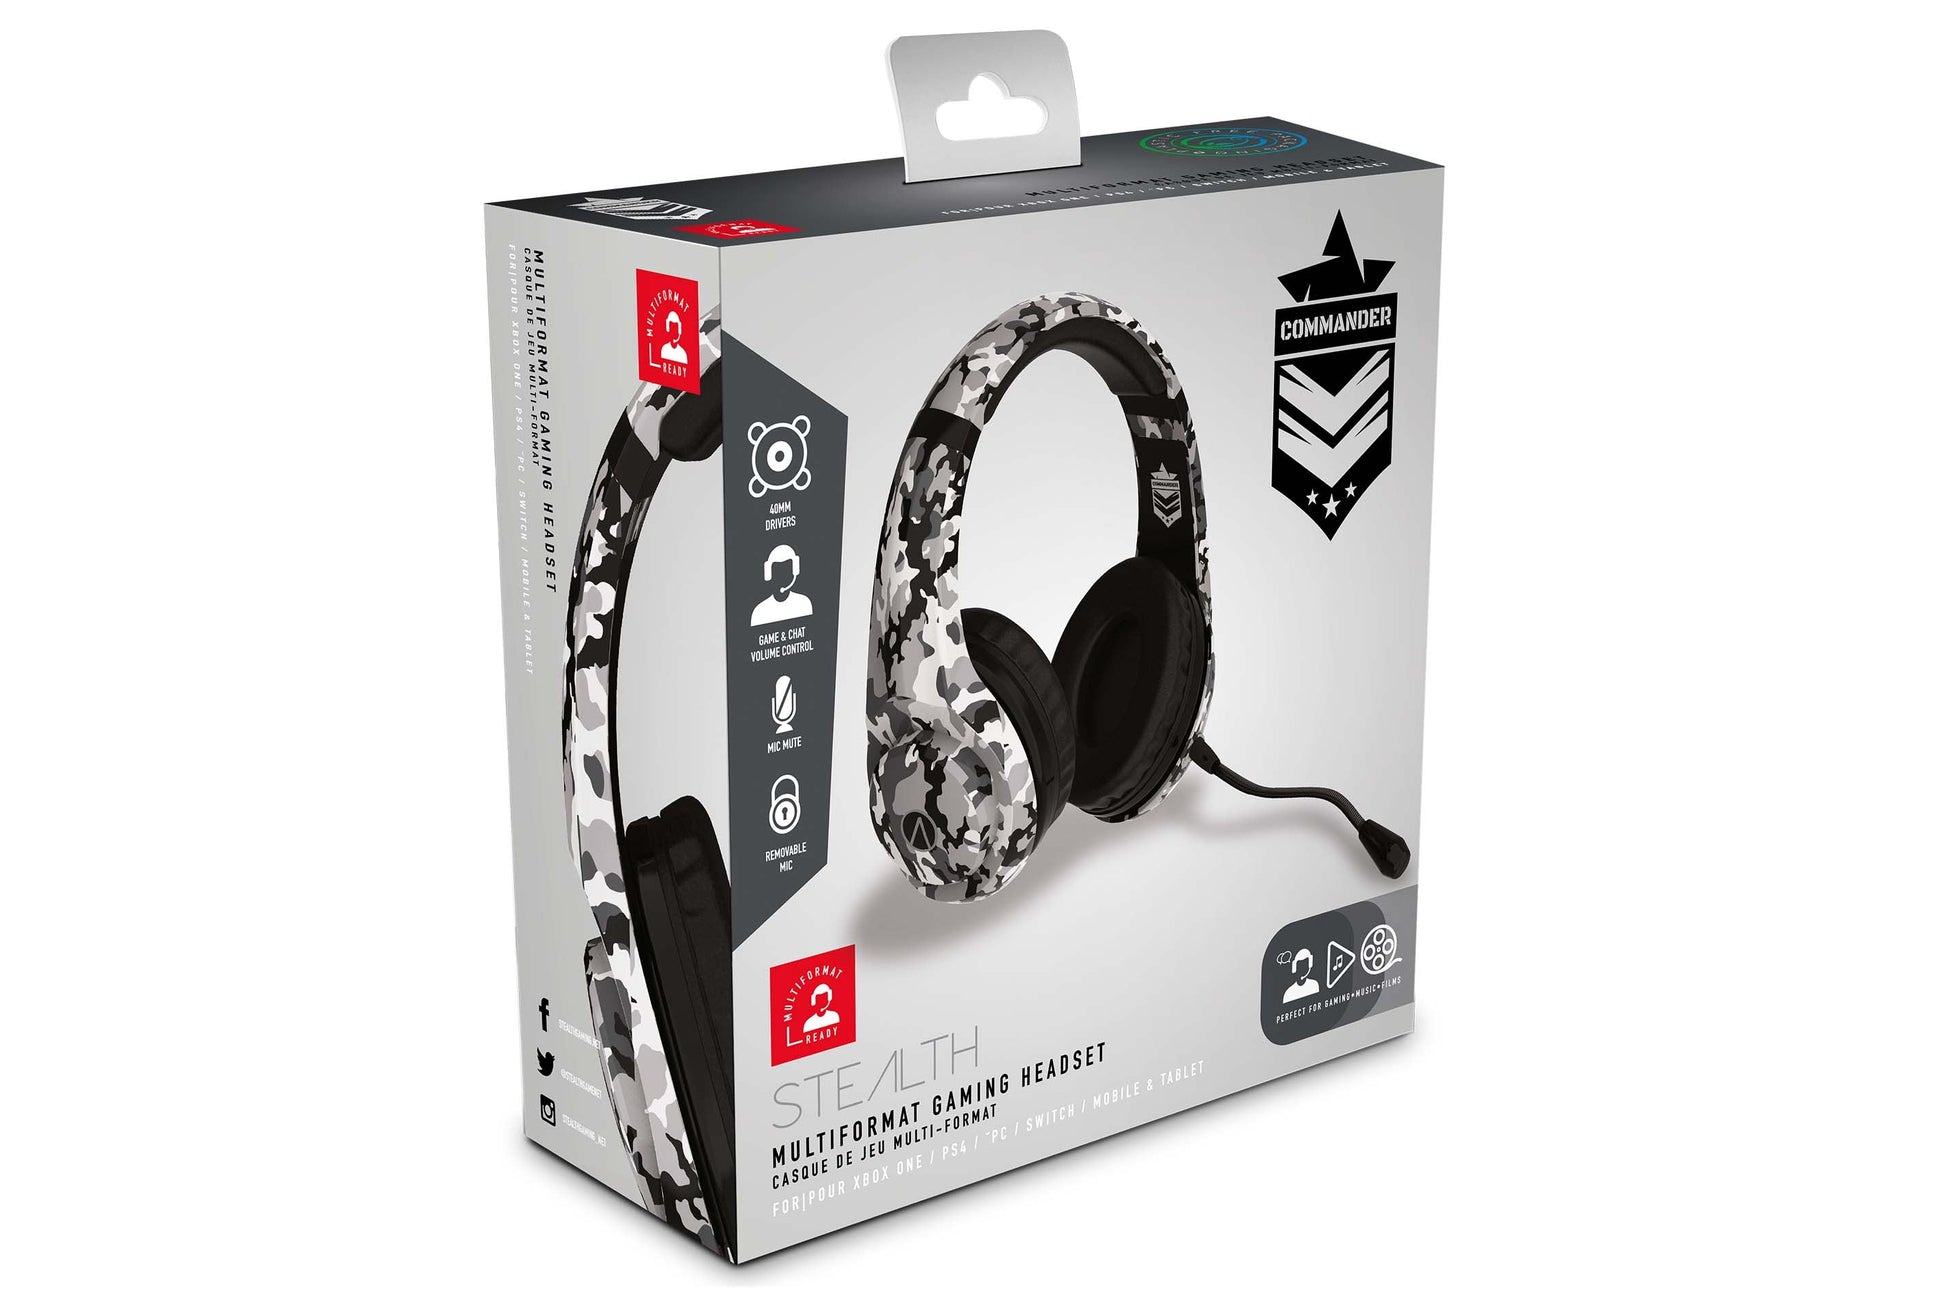 Stealth XP Commander Gaming Headset - Urban Camouflage | Audio | Maplin |  The Electronics Specialist